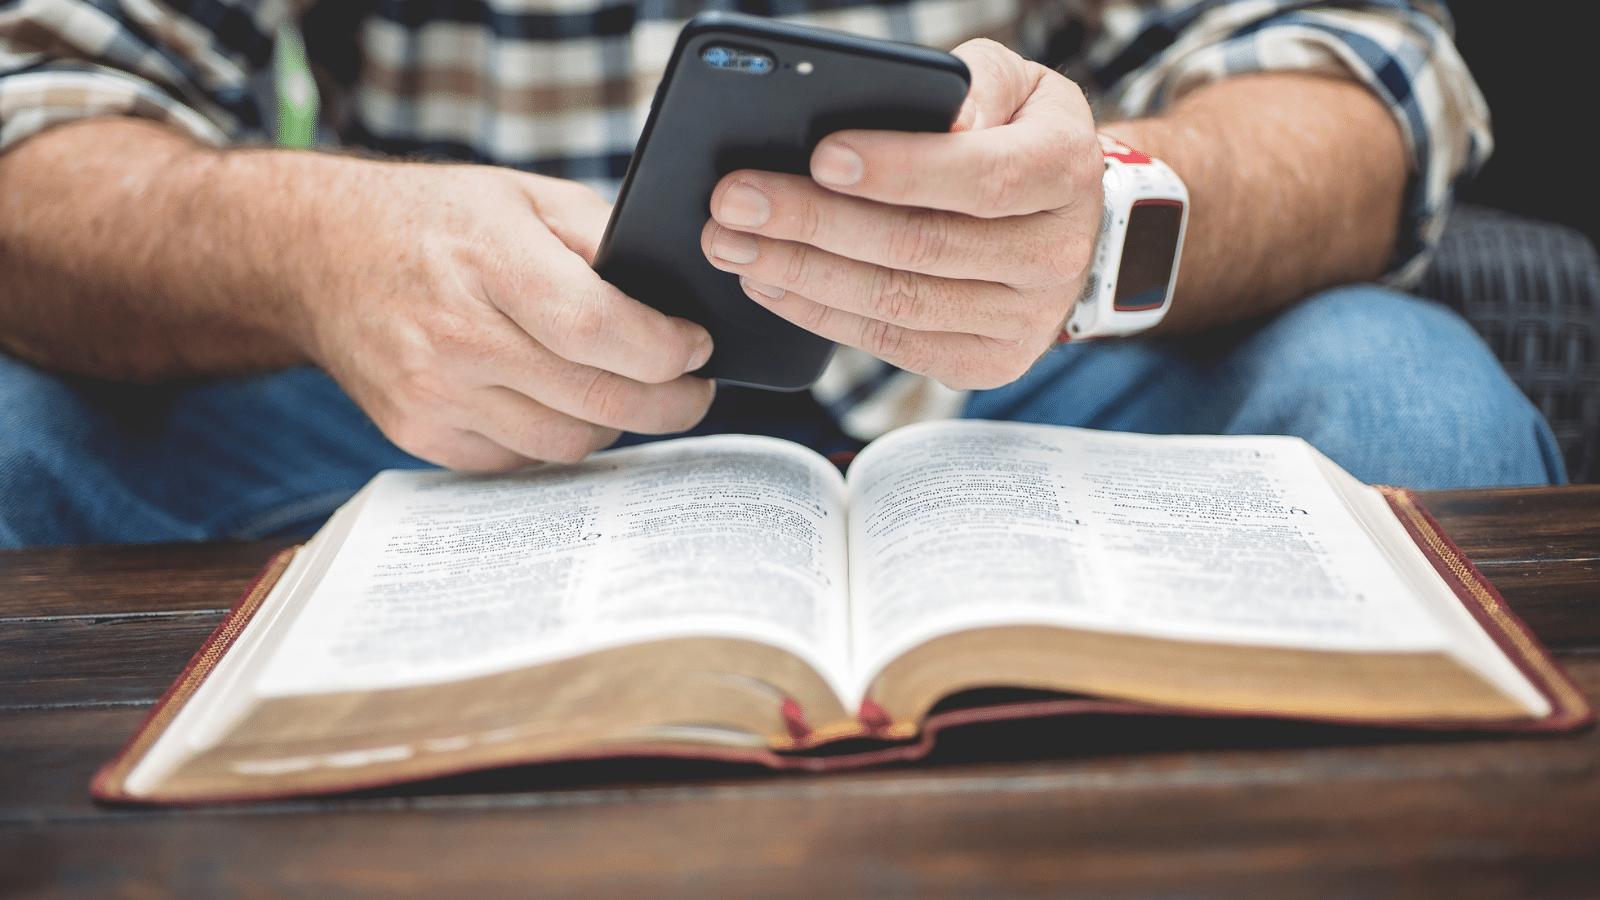 Man looking at phone over Bible